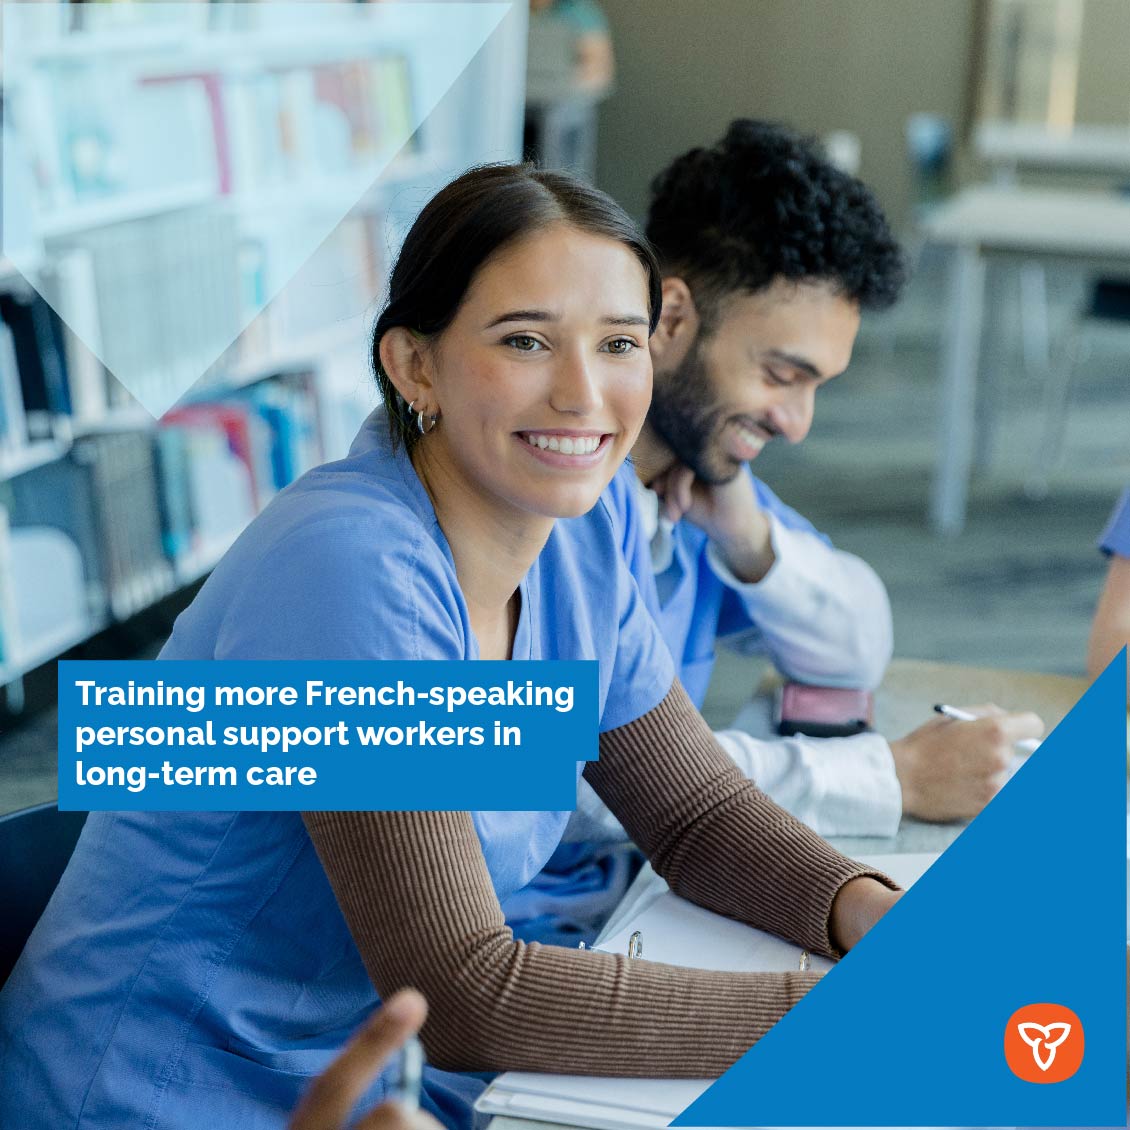 Ontario is investing more than $2.5 million over two years to help more French-speaking long-term care staff upskill to become personal support workers. This will help more Francophone residents connect to care in their language of choice. collegeboreal.ca/en/formation/a…